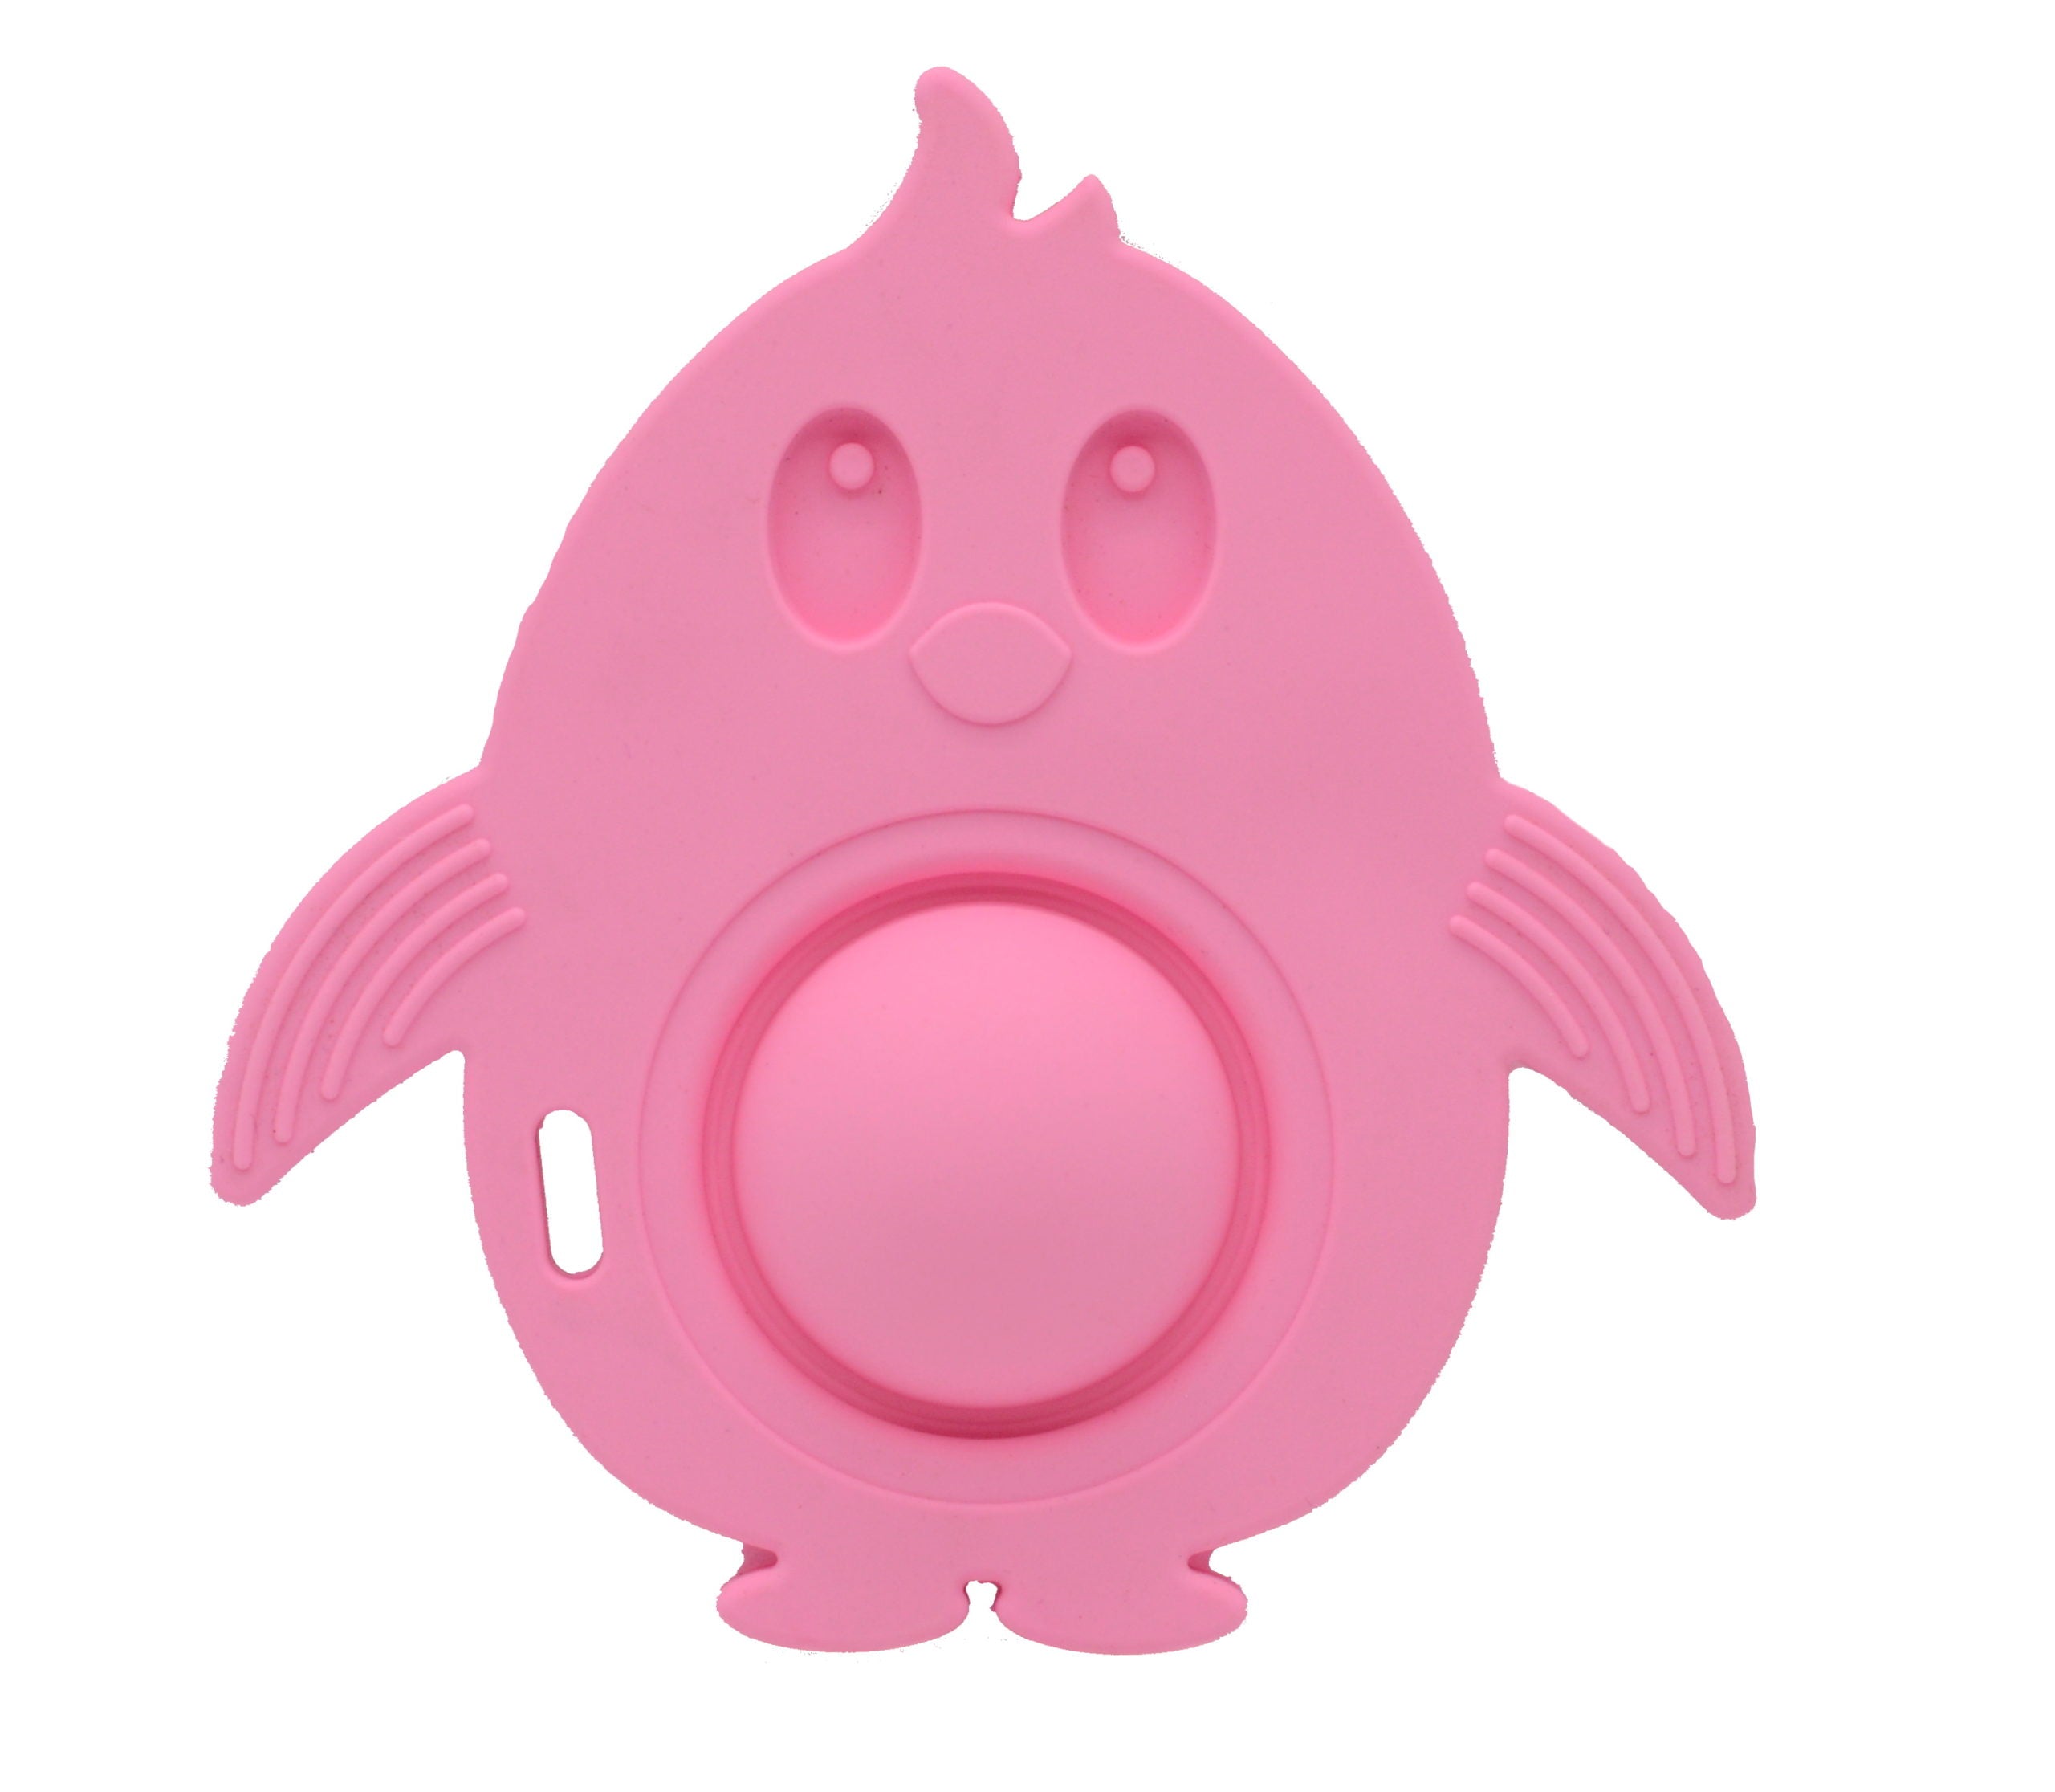 Gogzy - Parent-child Interactive Silicone Baby Toy Set - Suction Cups Education Teething Toys for Infant Toddler Ages 6m+, BPA Free (Pink)